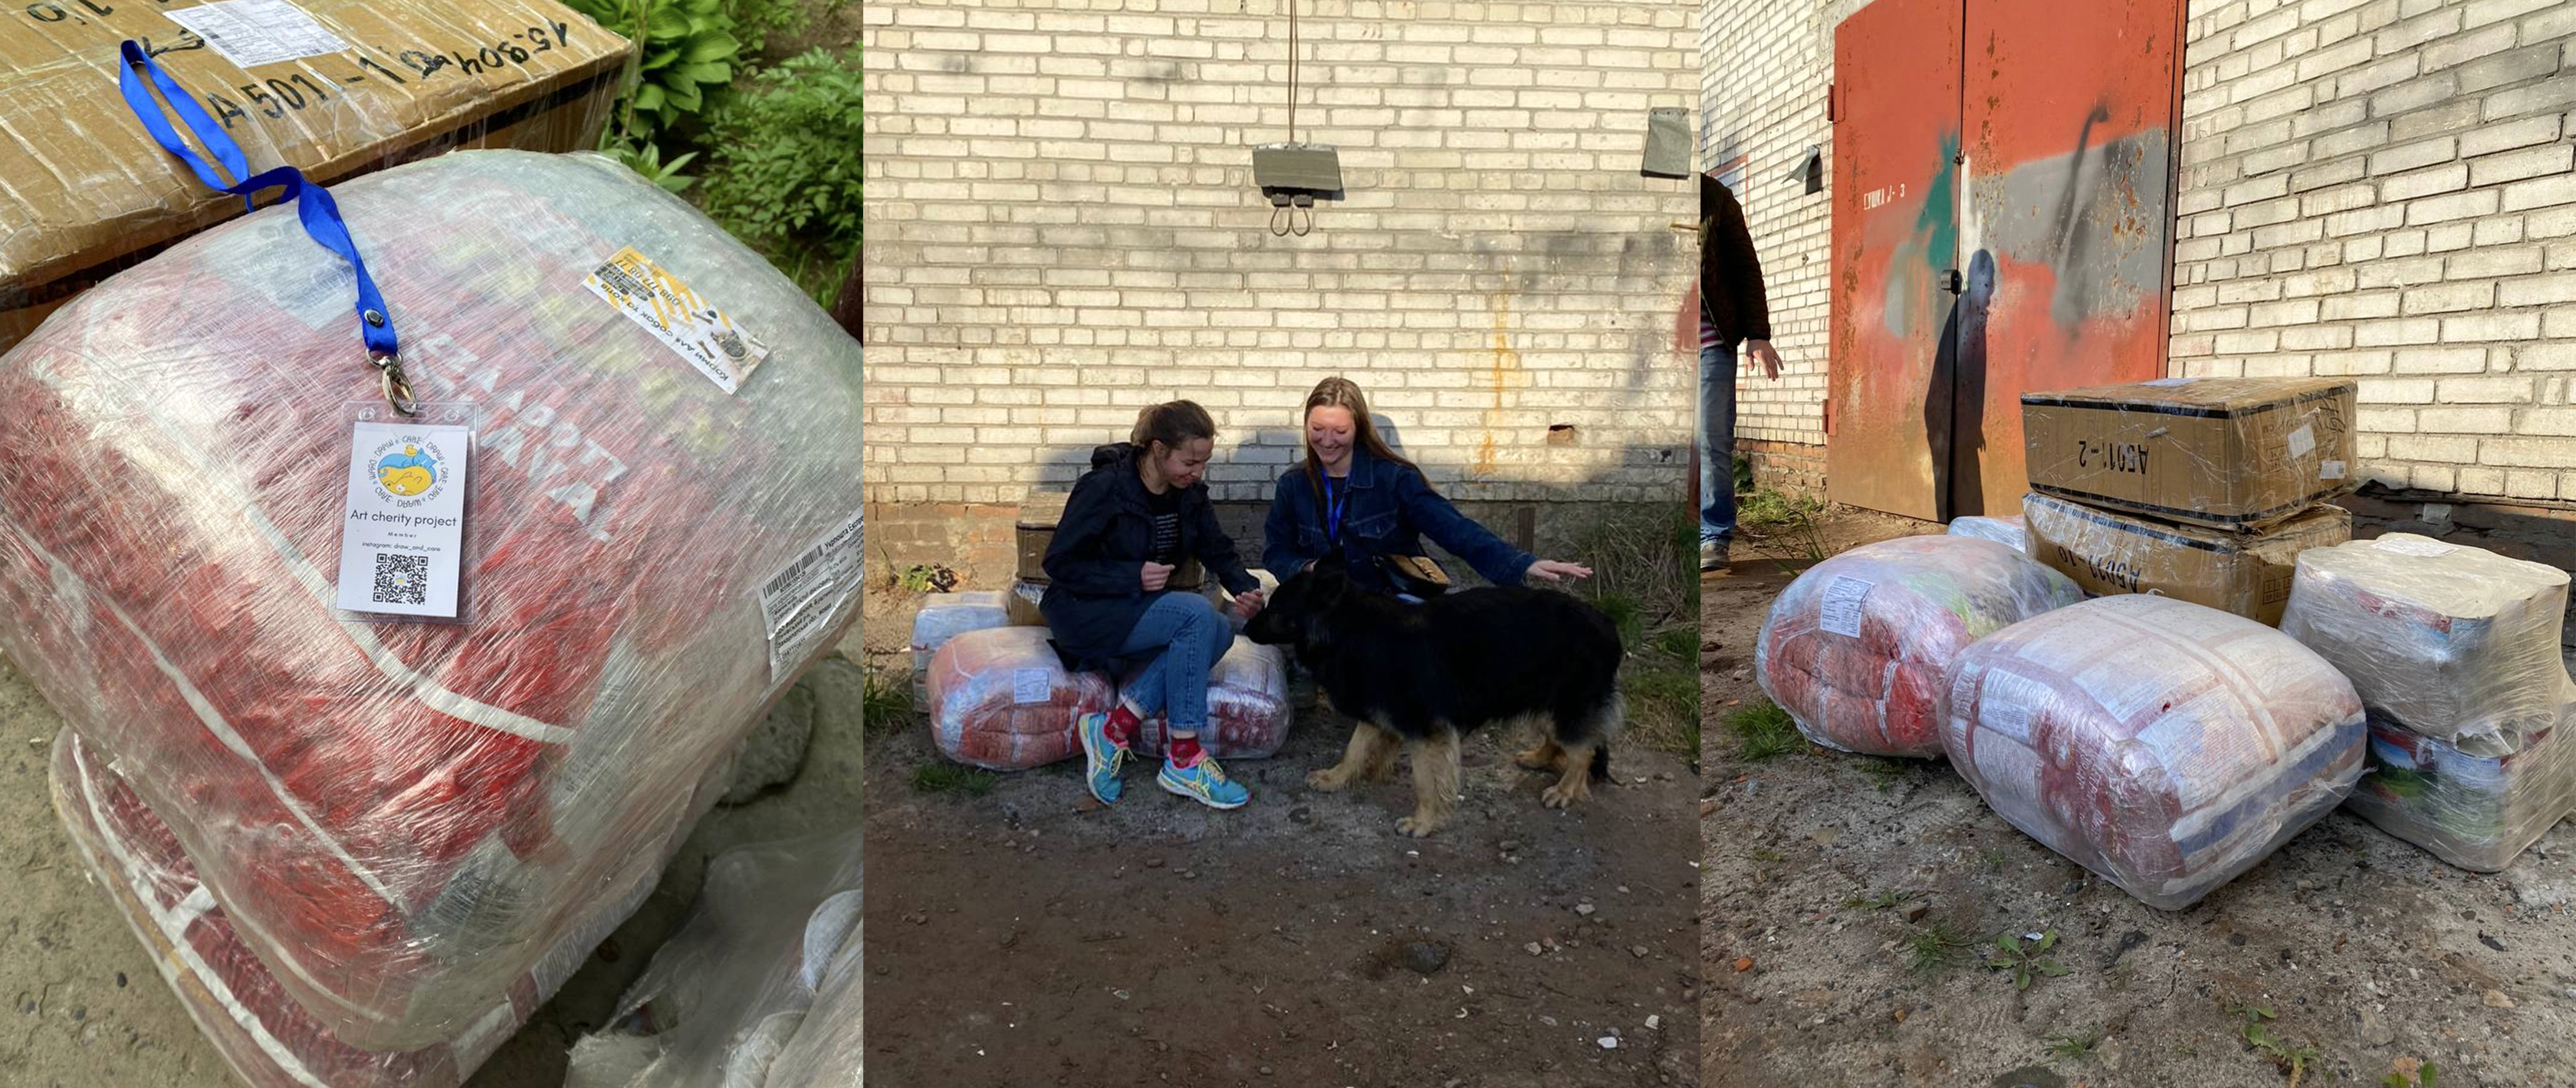 On May 11, 2022, the volunteer team of our creative charity project, “Draw & Care”, visited the Wow Paw Ukraine Shelter for cats and dogs that were evacuated from war zones in Lviv.